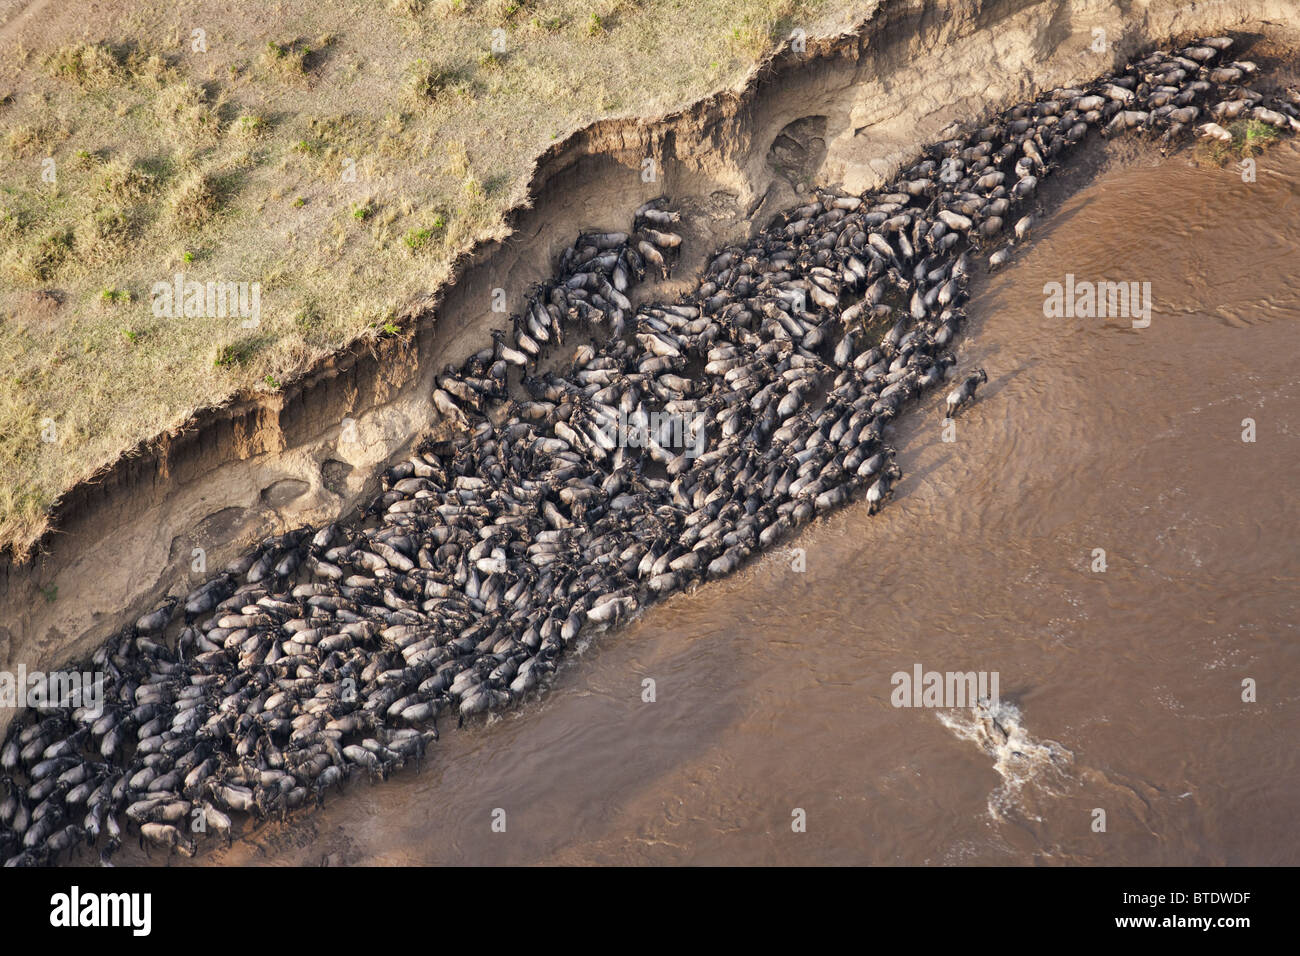 Aerial view of Blue Wildebeest (Connochaetes taurinus) crossing the Mara River Stock Photo